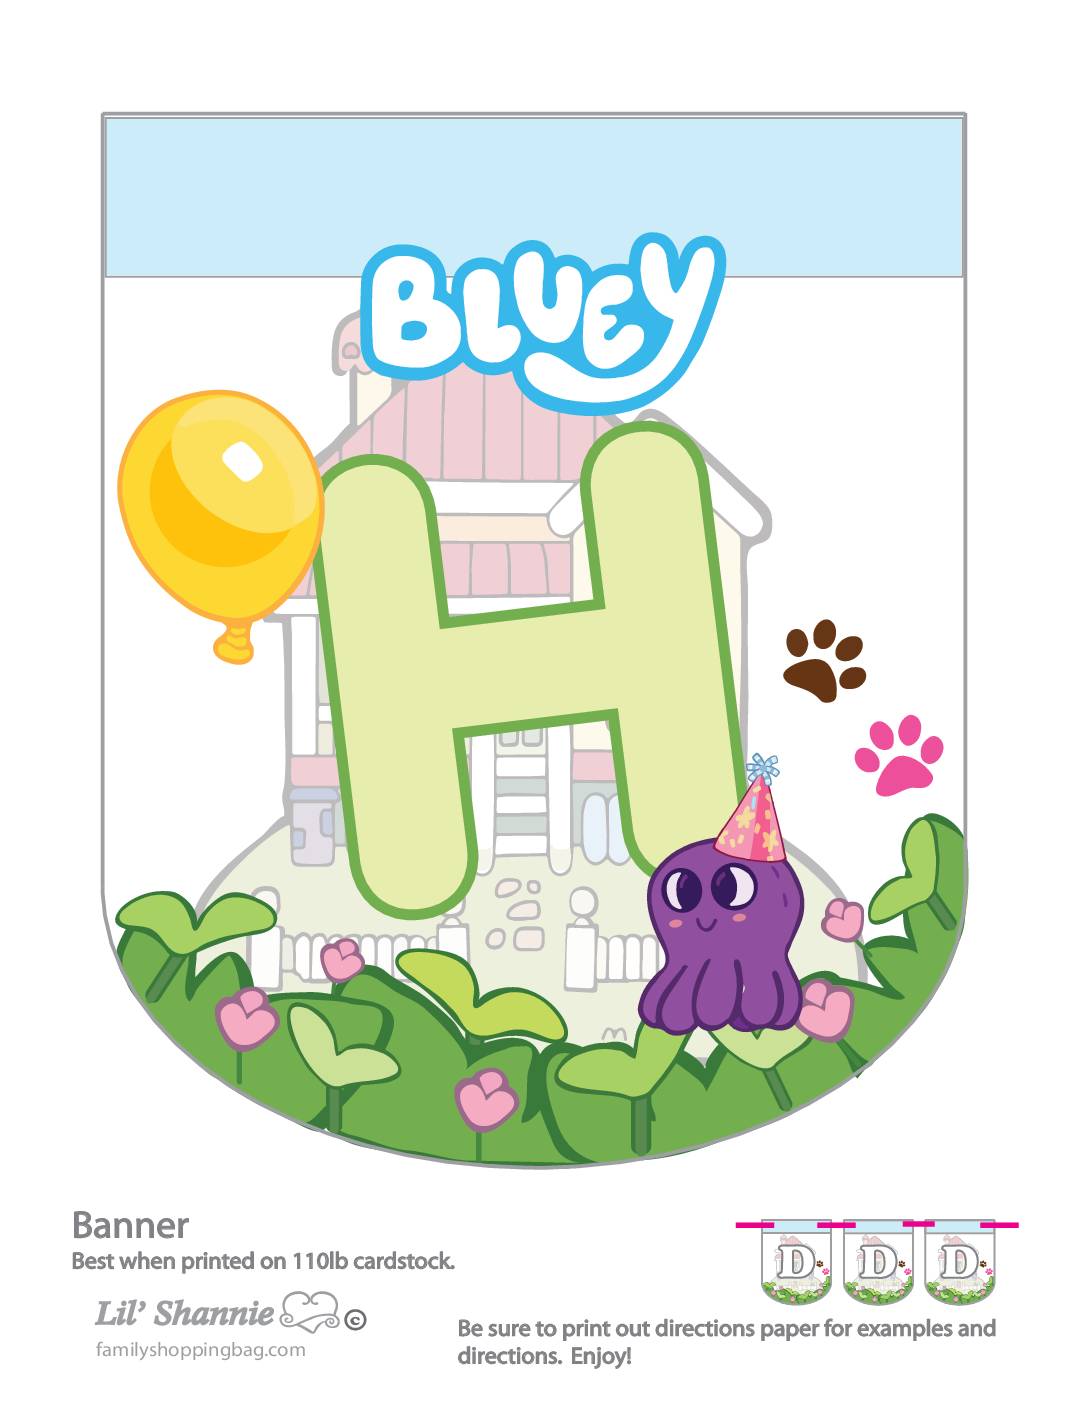 Banner H Bluey Party Banners